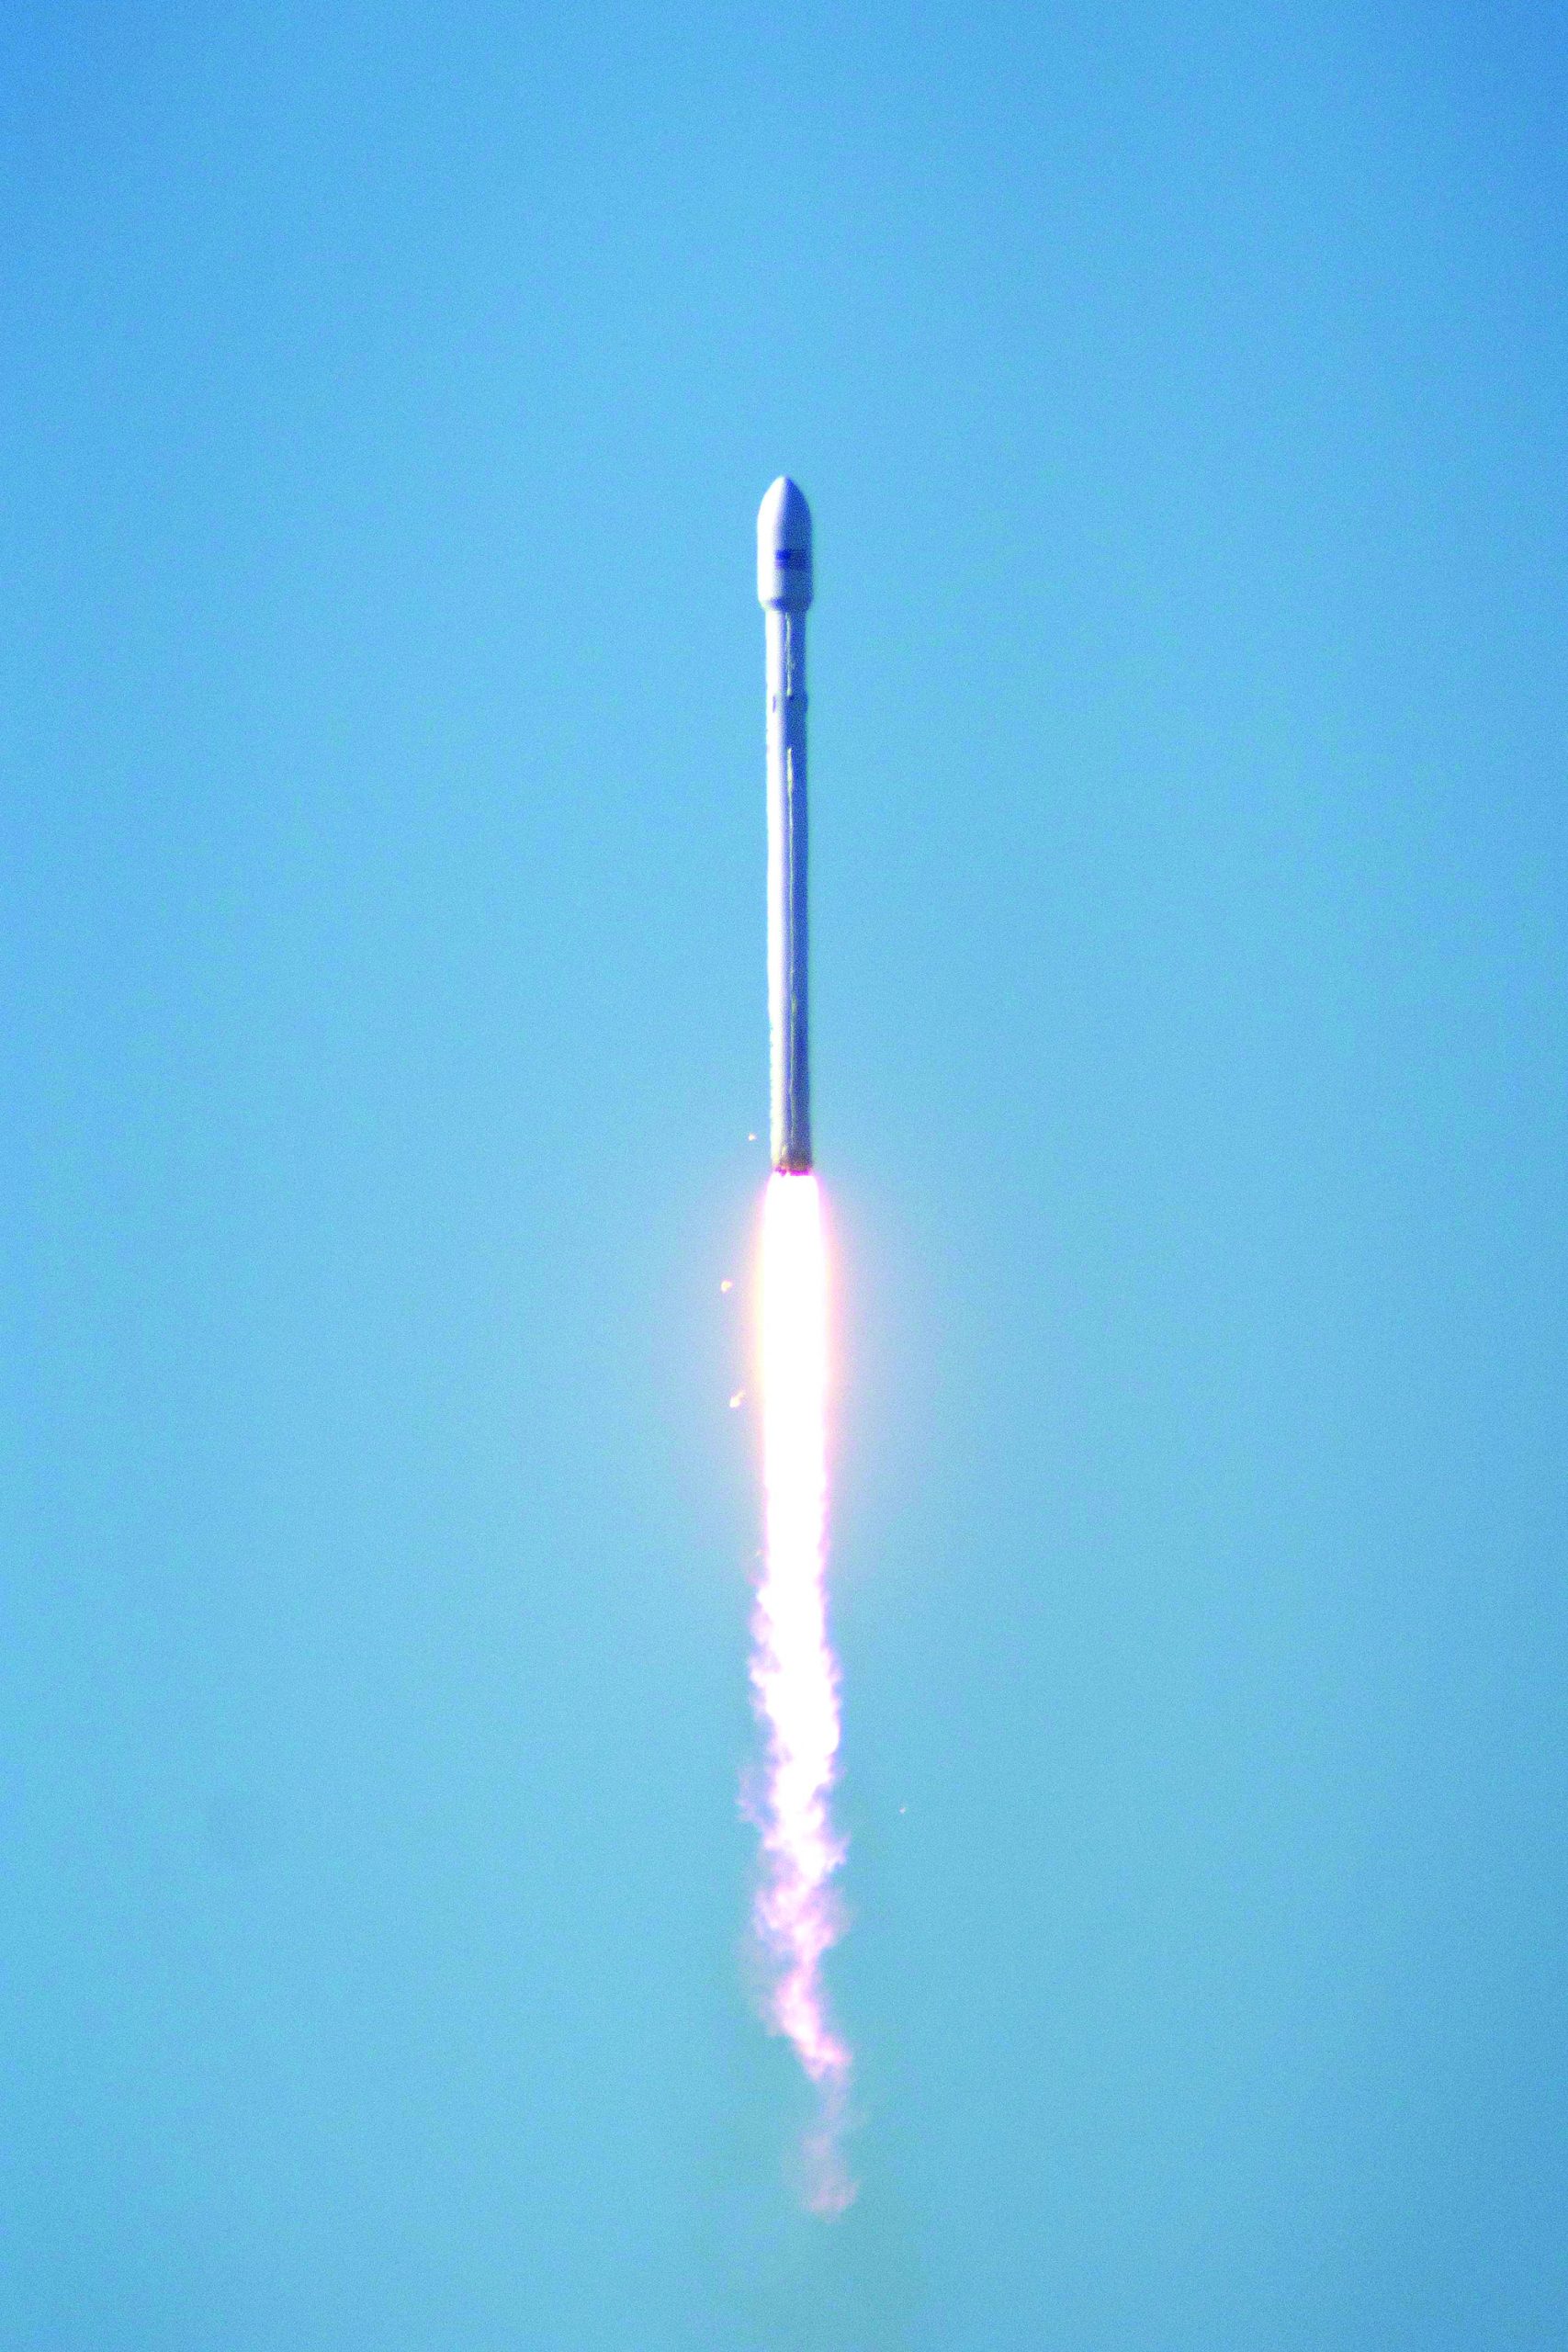 Sydney University’s rocket launch on Tolarno Station will lead to the clean-up of space debris.